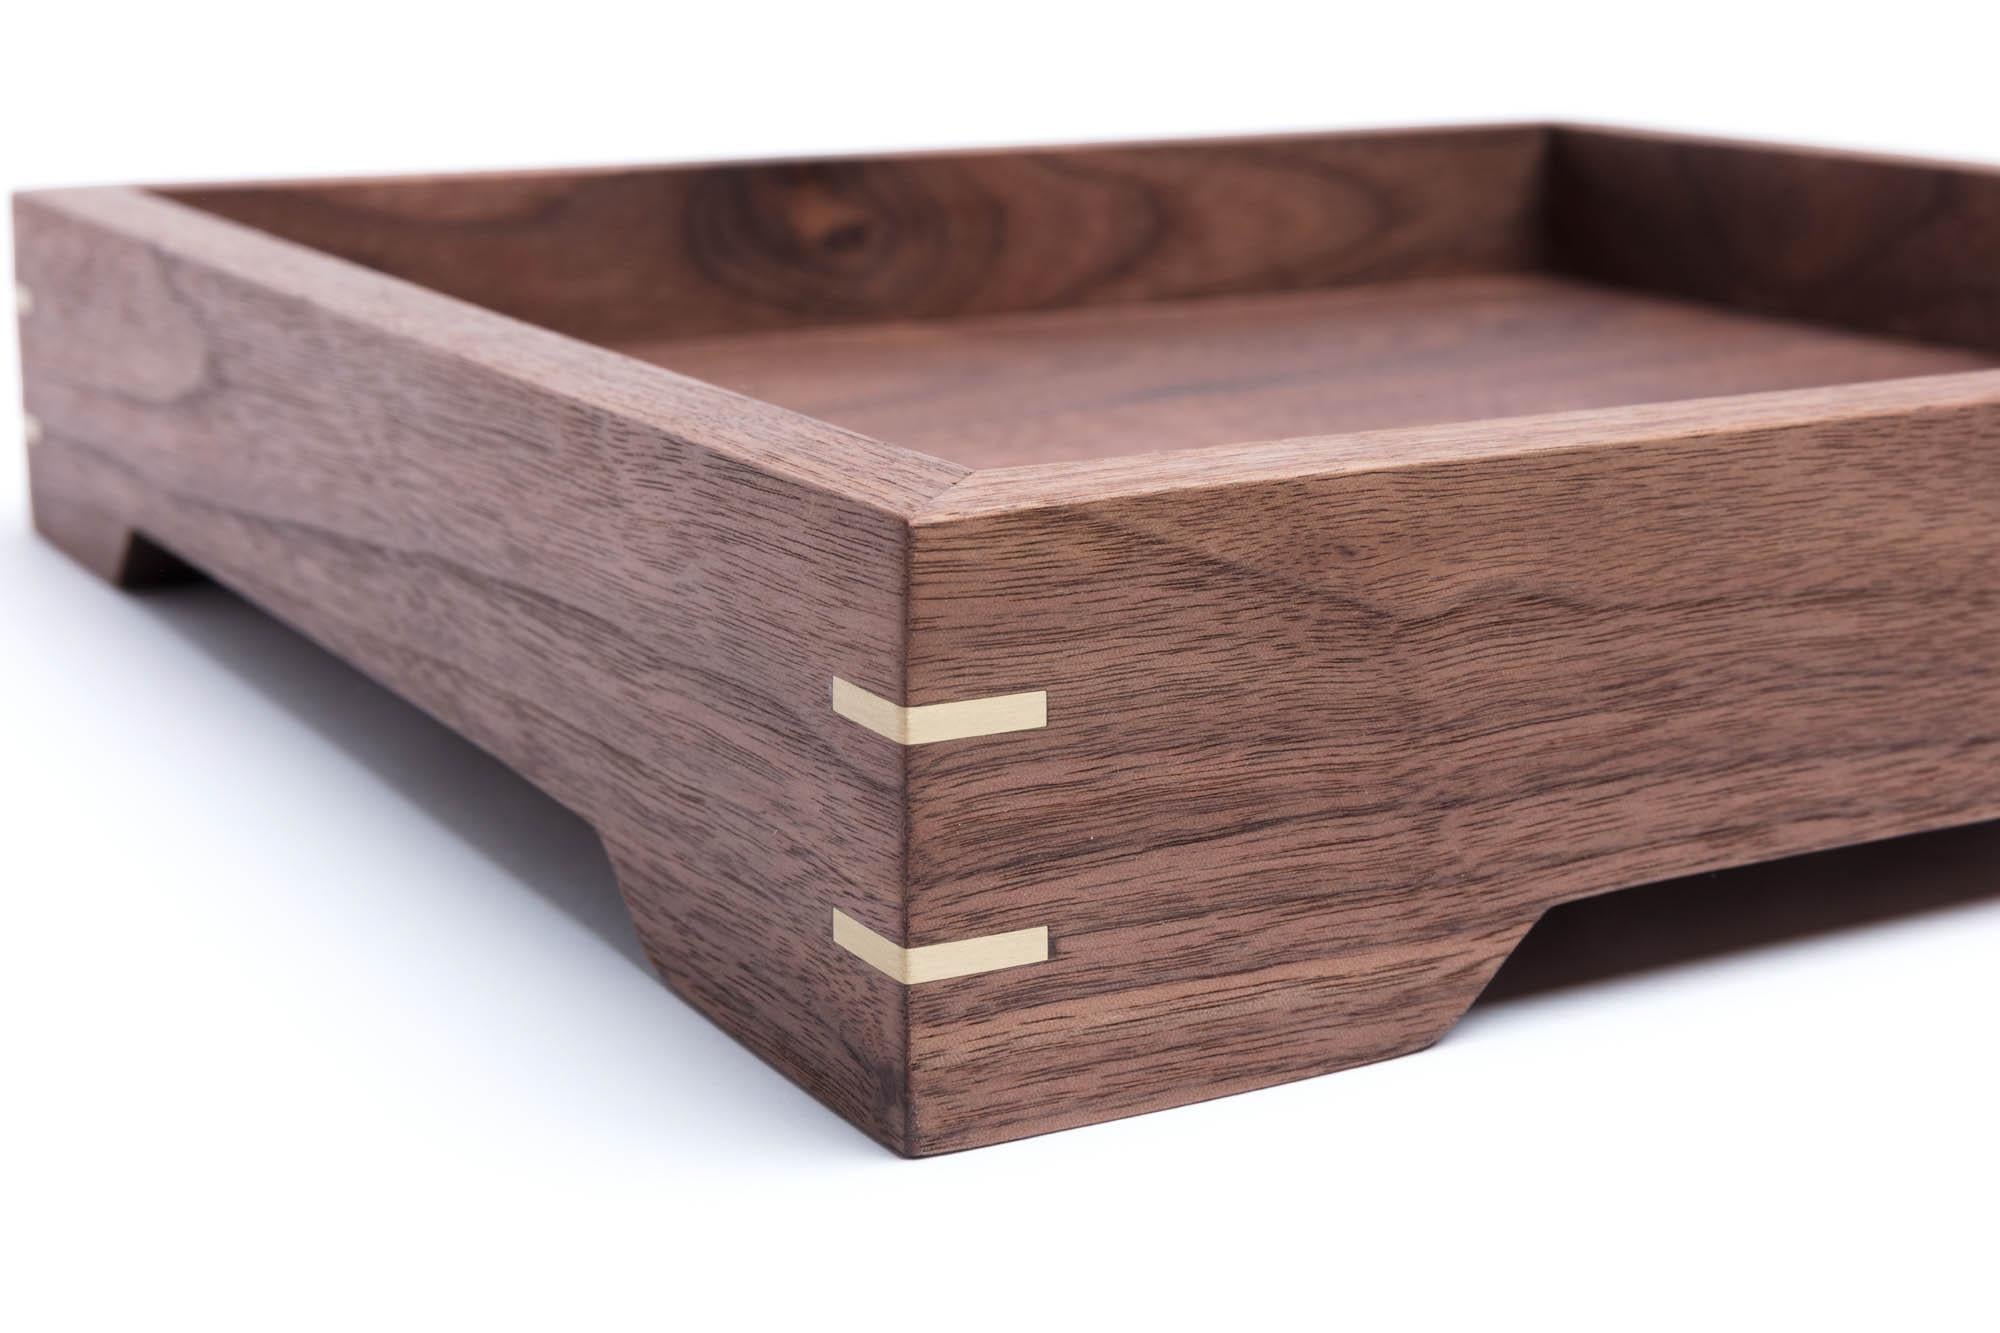 Hand-Crafted Small Walnut Wood and Brass Tray for Barware or Display by Alabama Sawyer